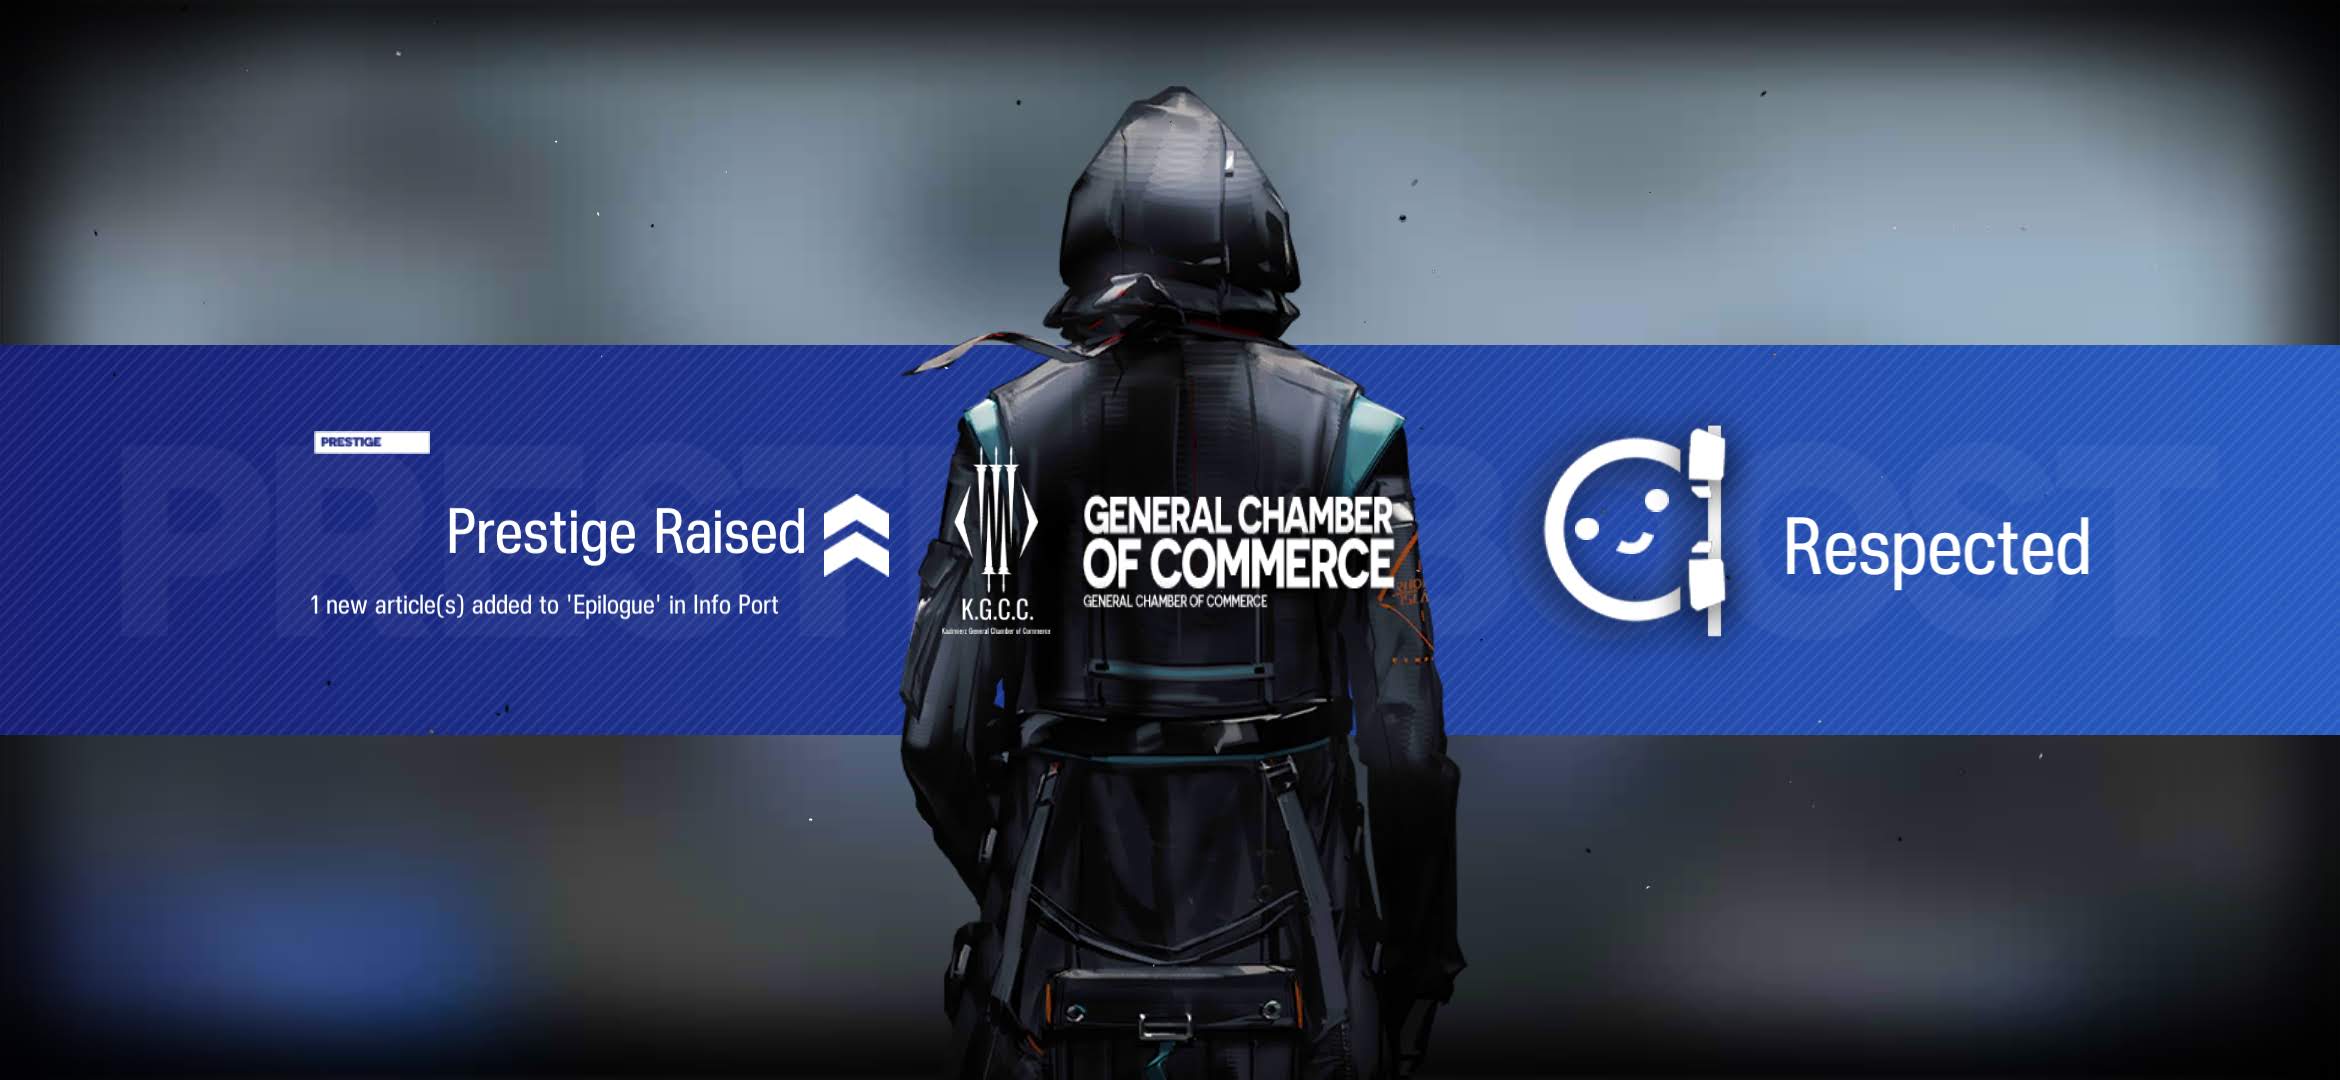 General Chamber of Commerce - Respected